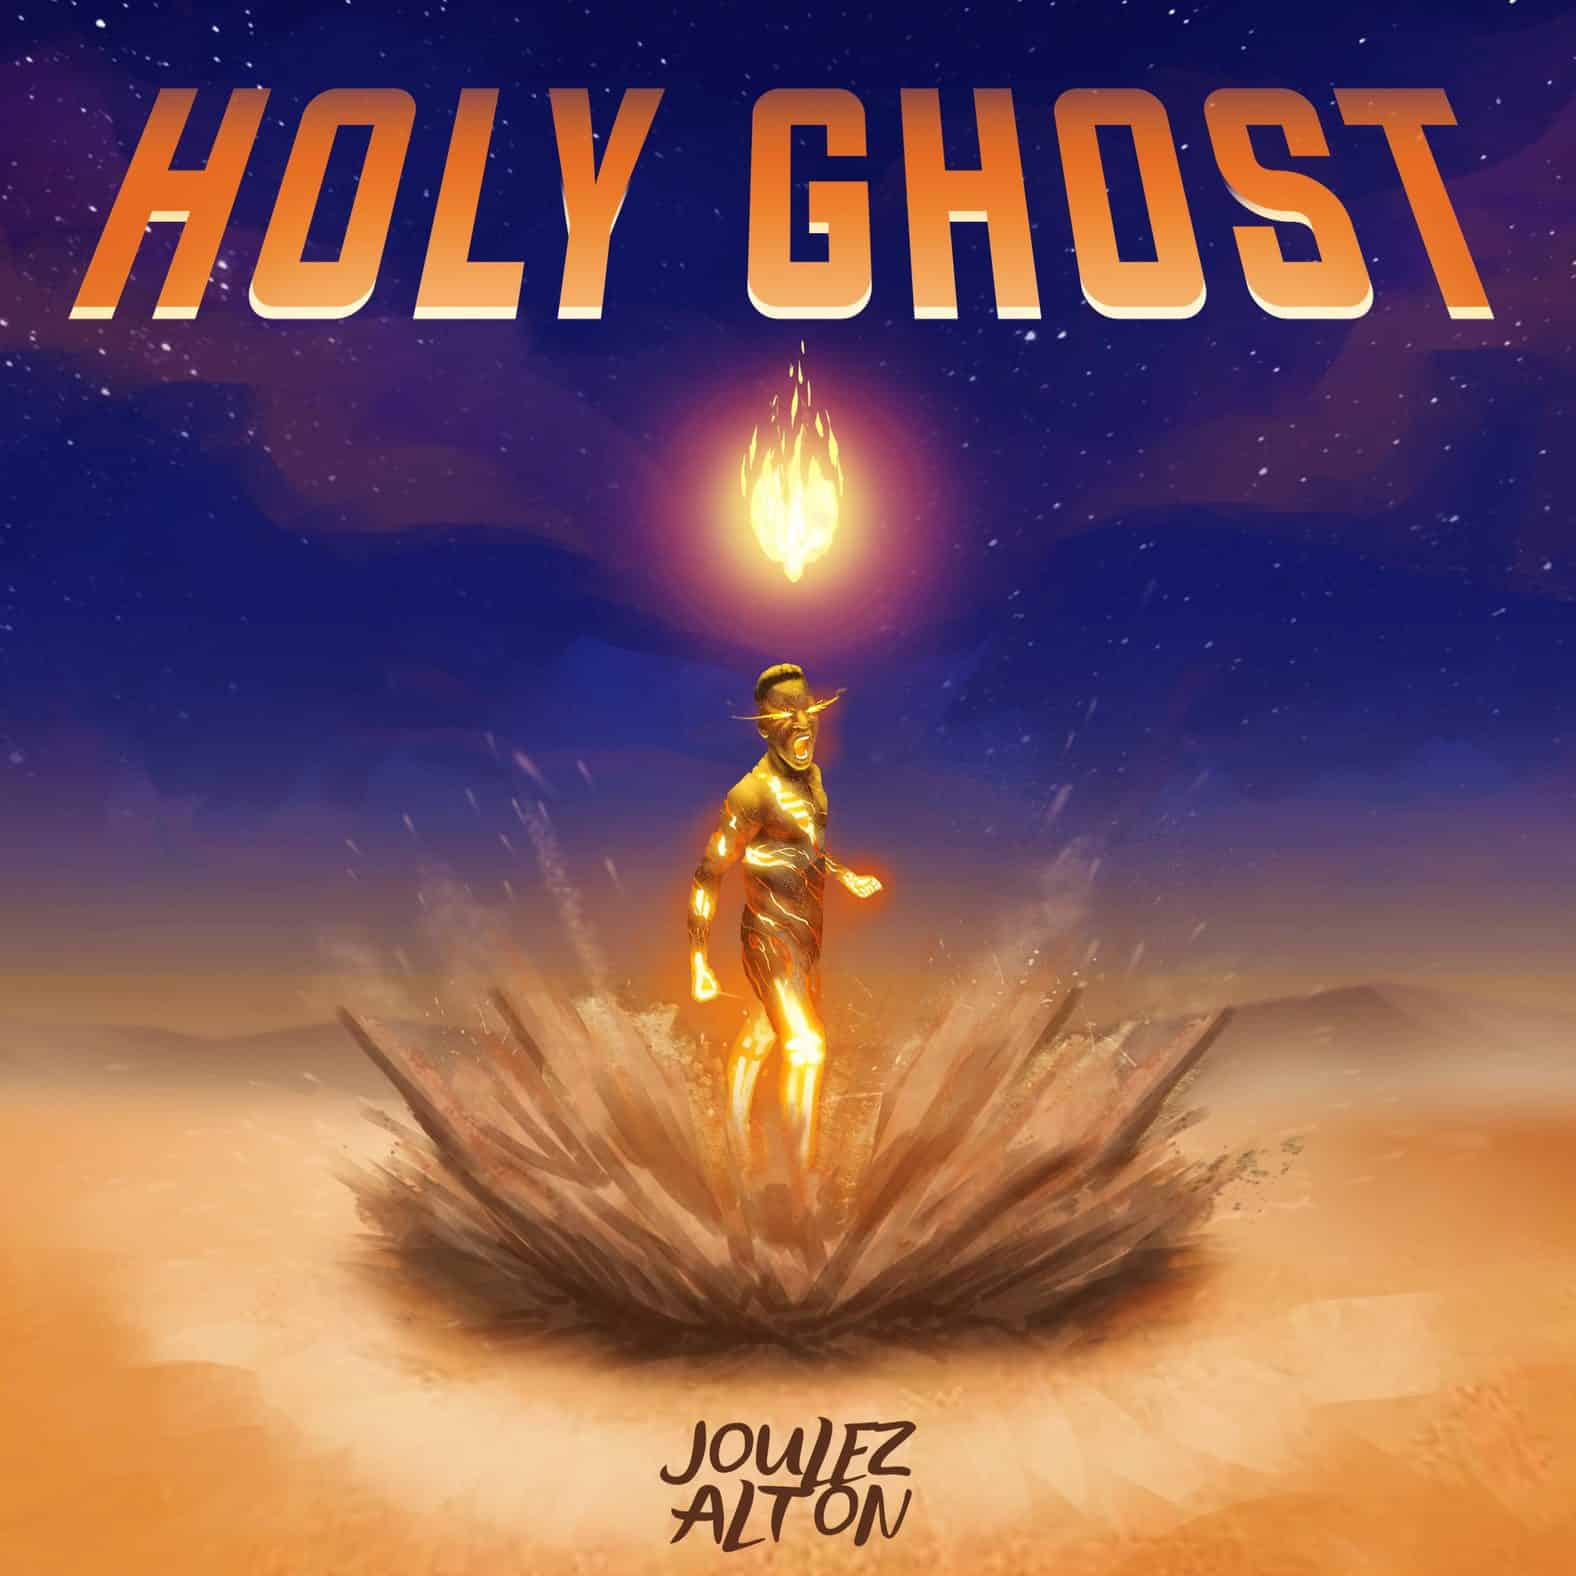 Download Mp3: Joulez Alton - Holy Ghost